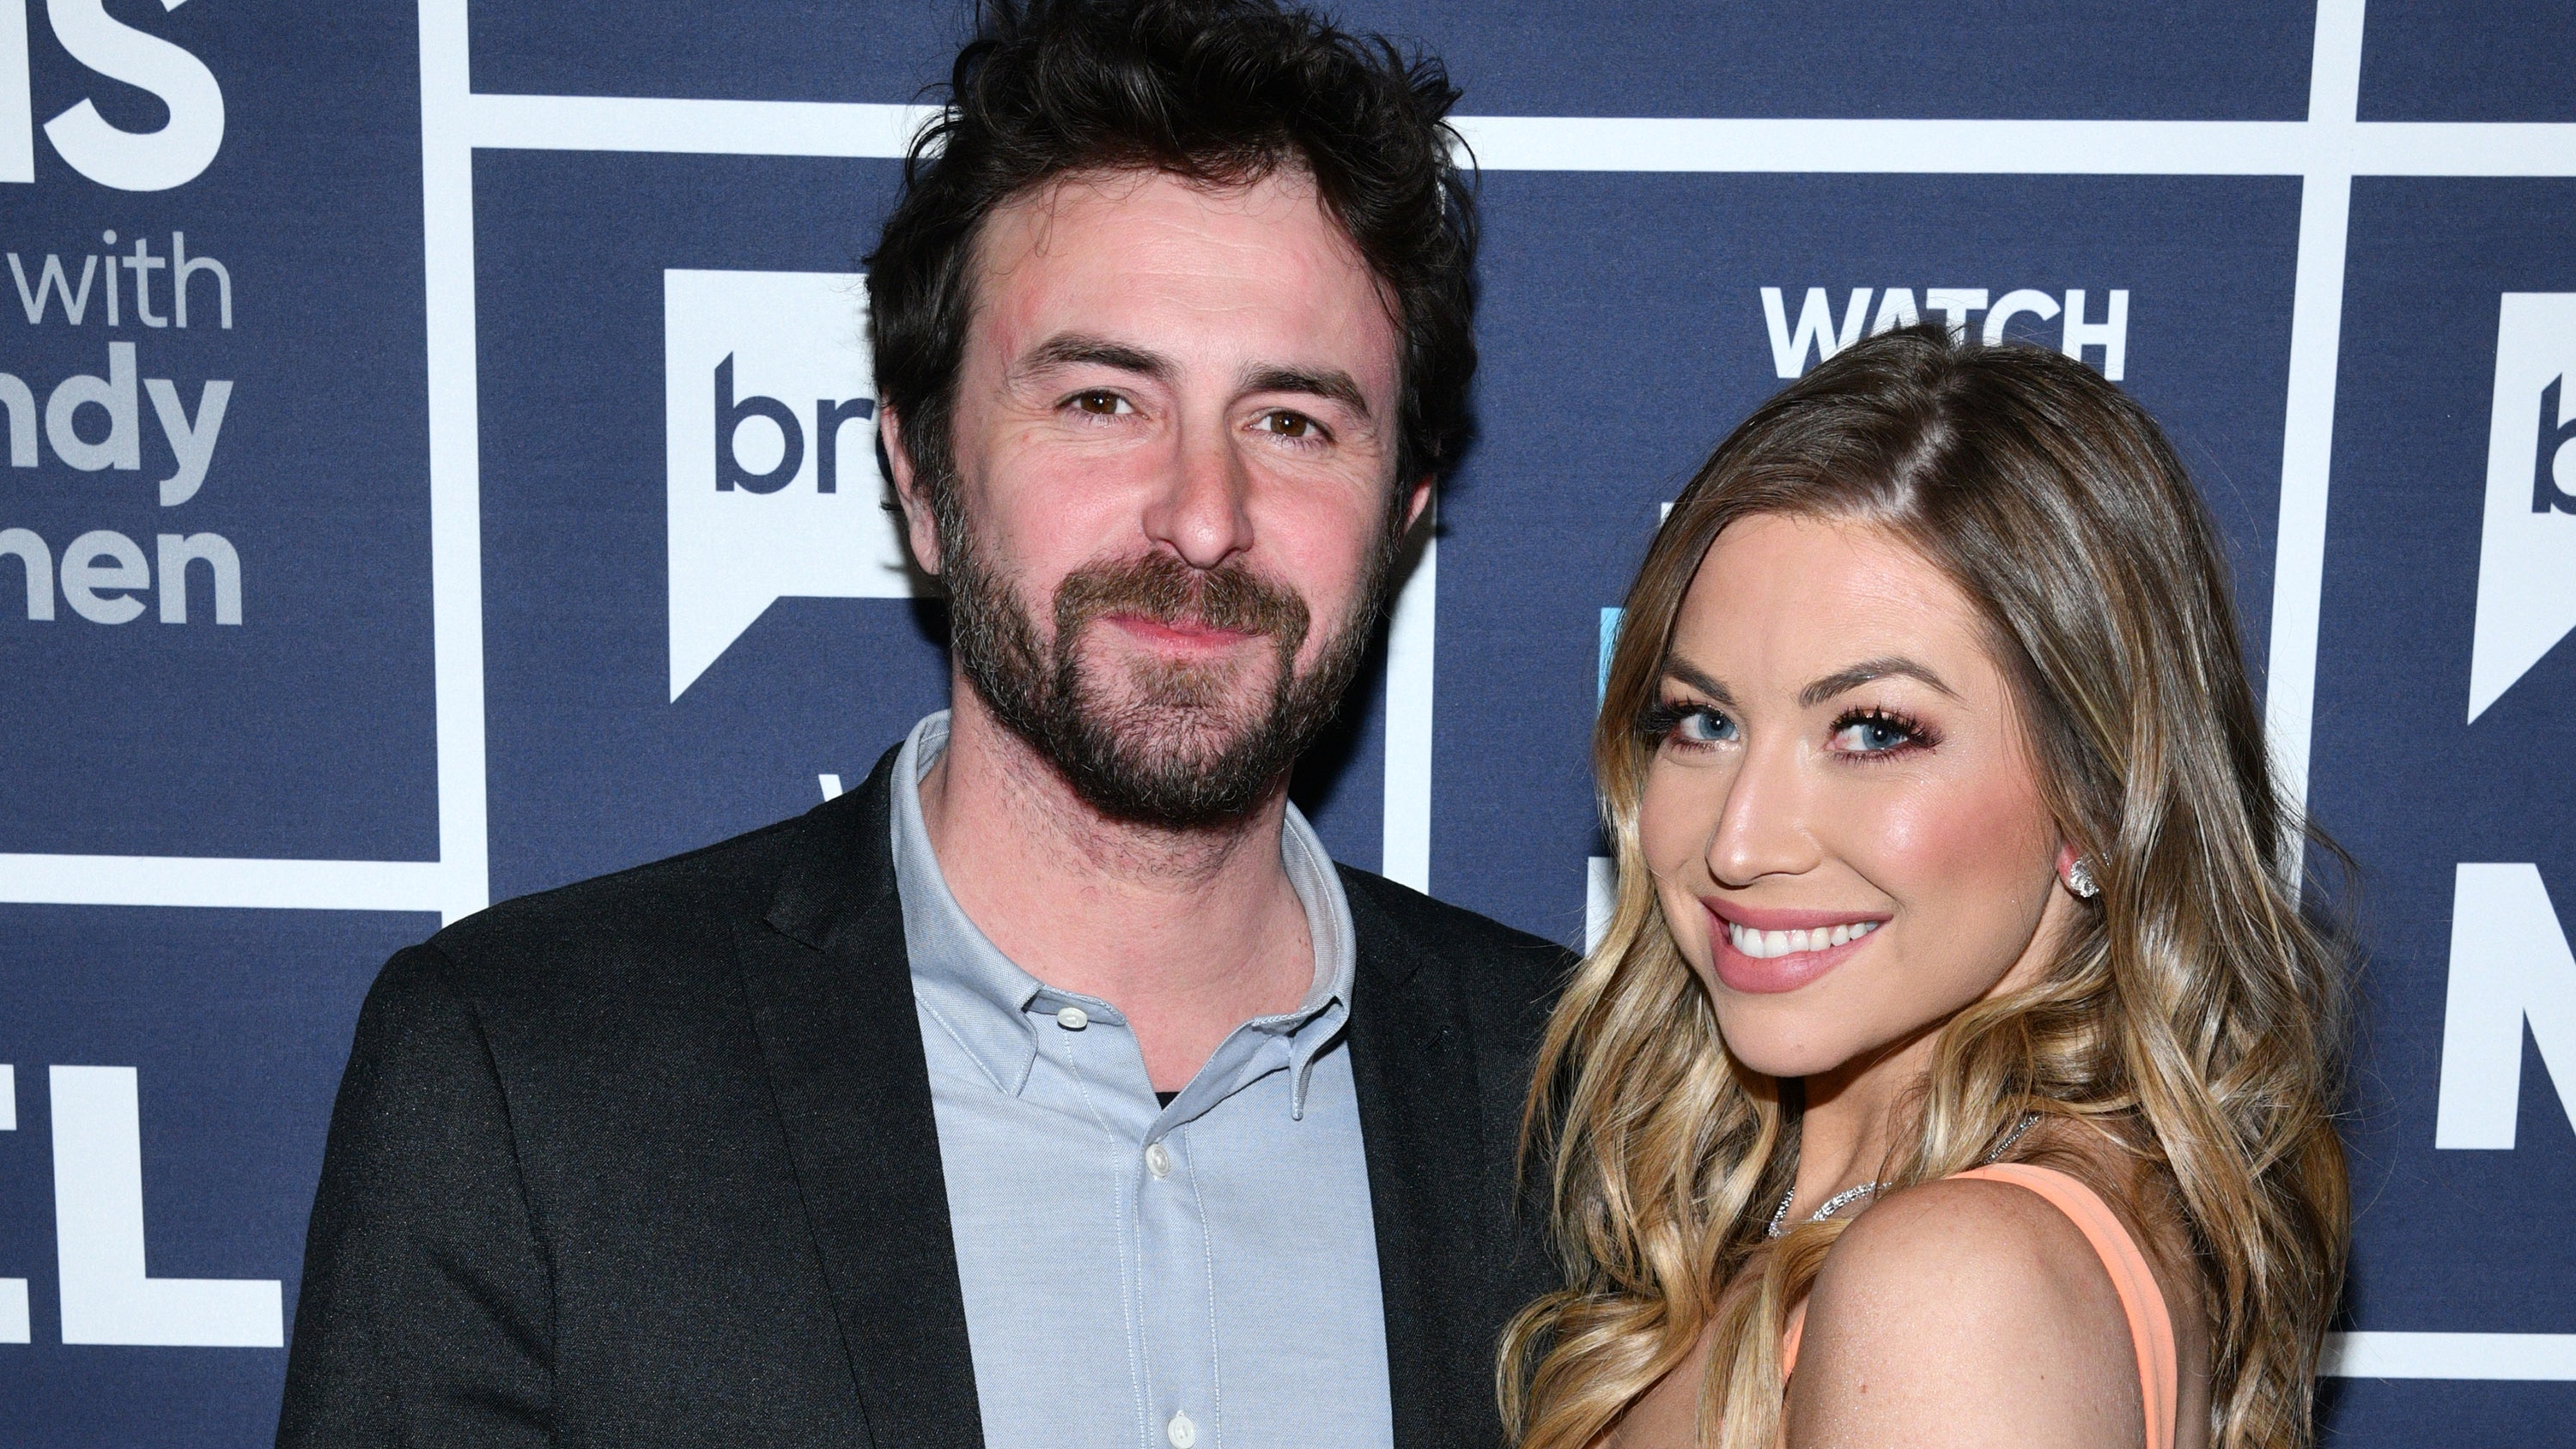 Stassi Schroeder and her husband Beau Clark welcome their daughter